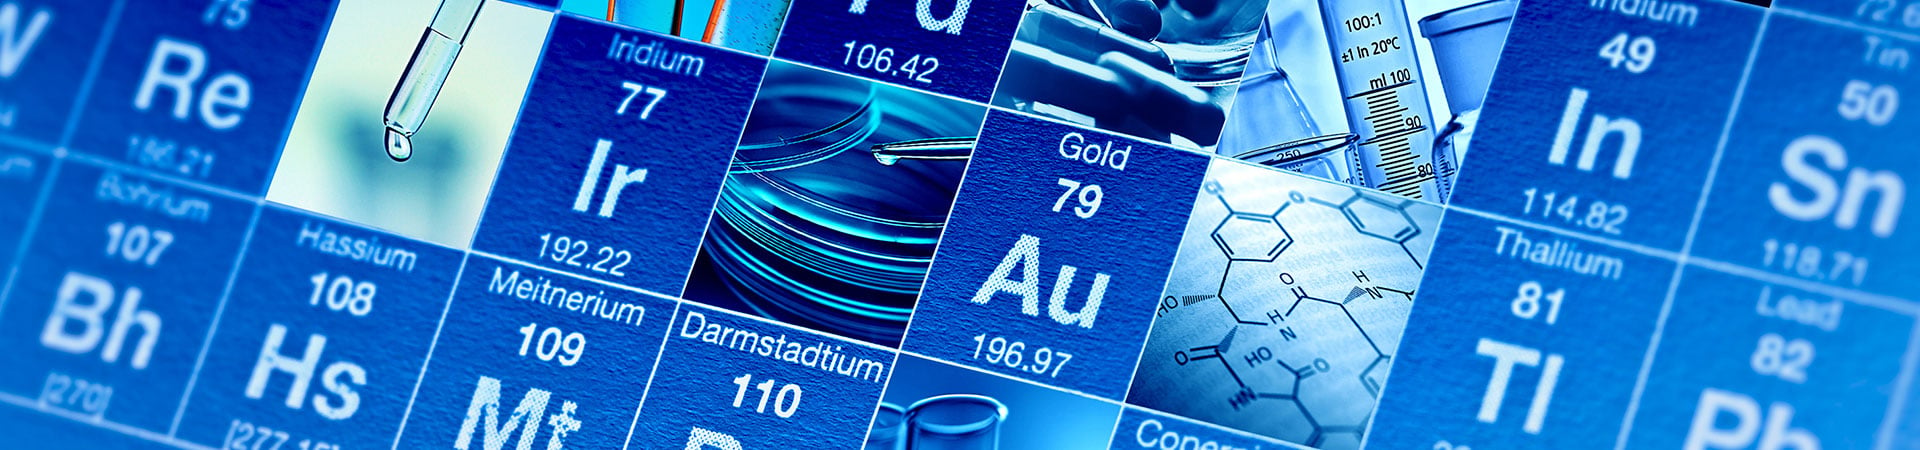 A zoomed-in view of the periodic table of elements, Au (Gold) focused in the center.